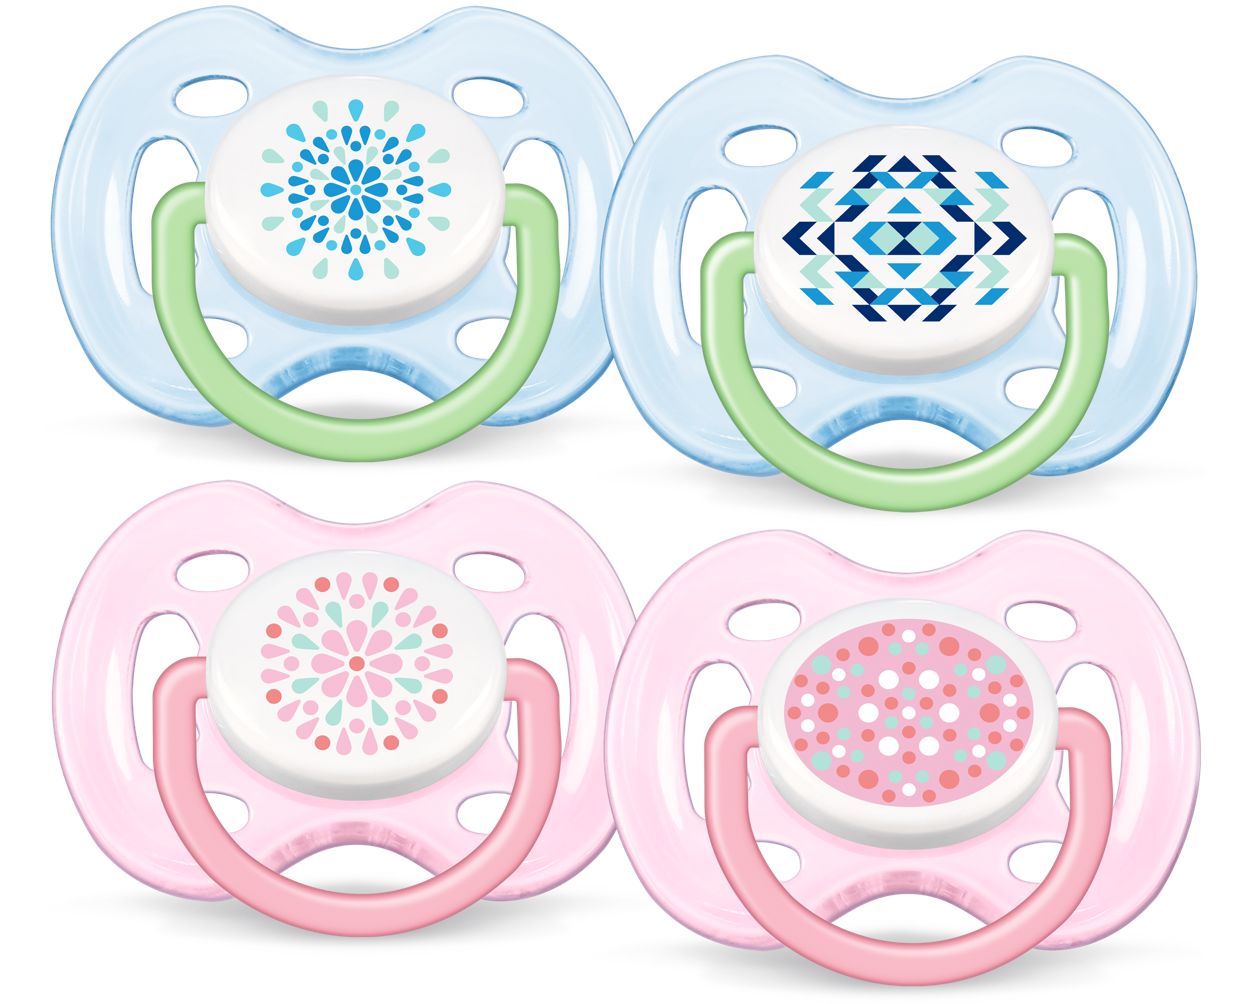 Philips Avent BPA Free Freeflow Pacifier, 0-6 Months 2 ea (1 Pack) –  thebabystoredemo